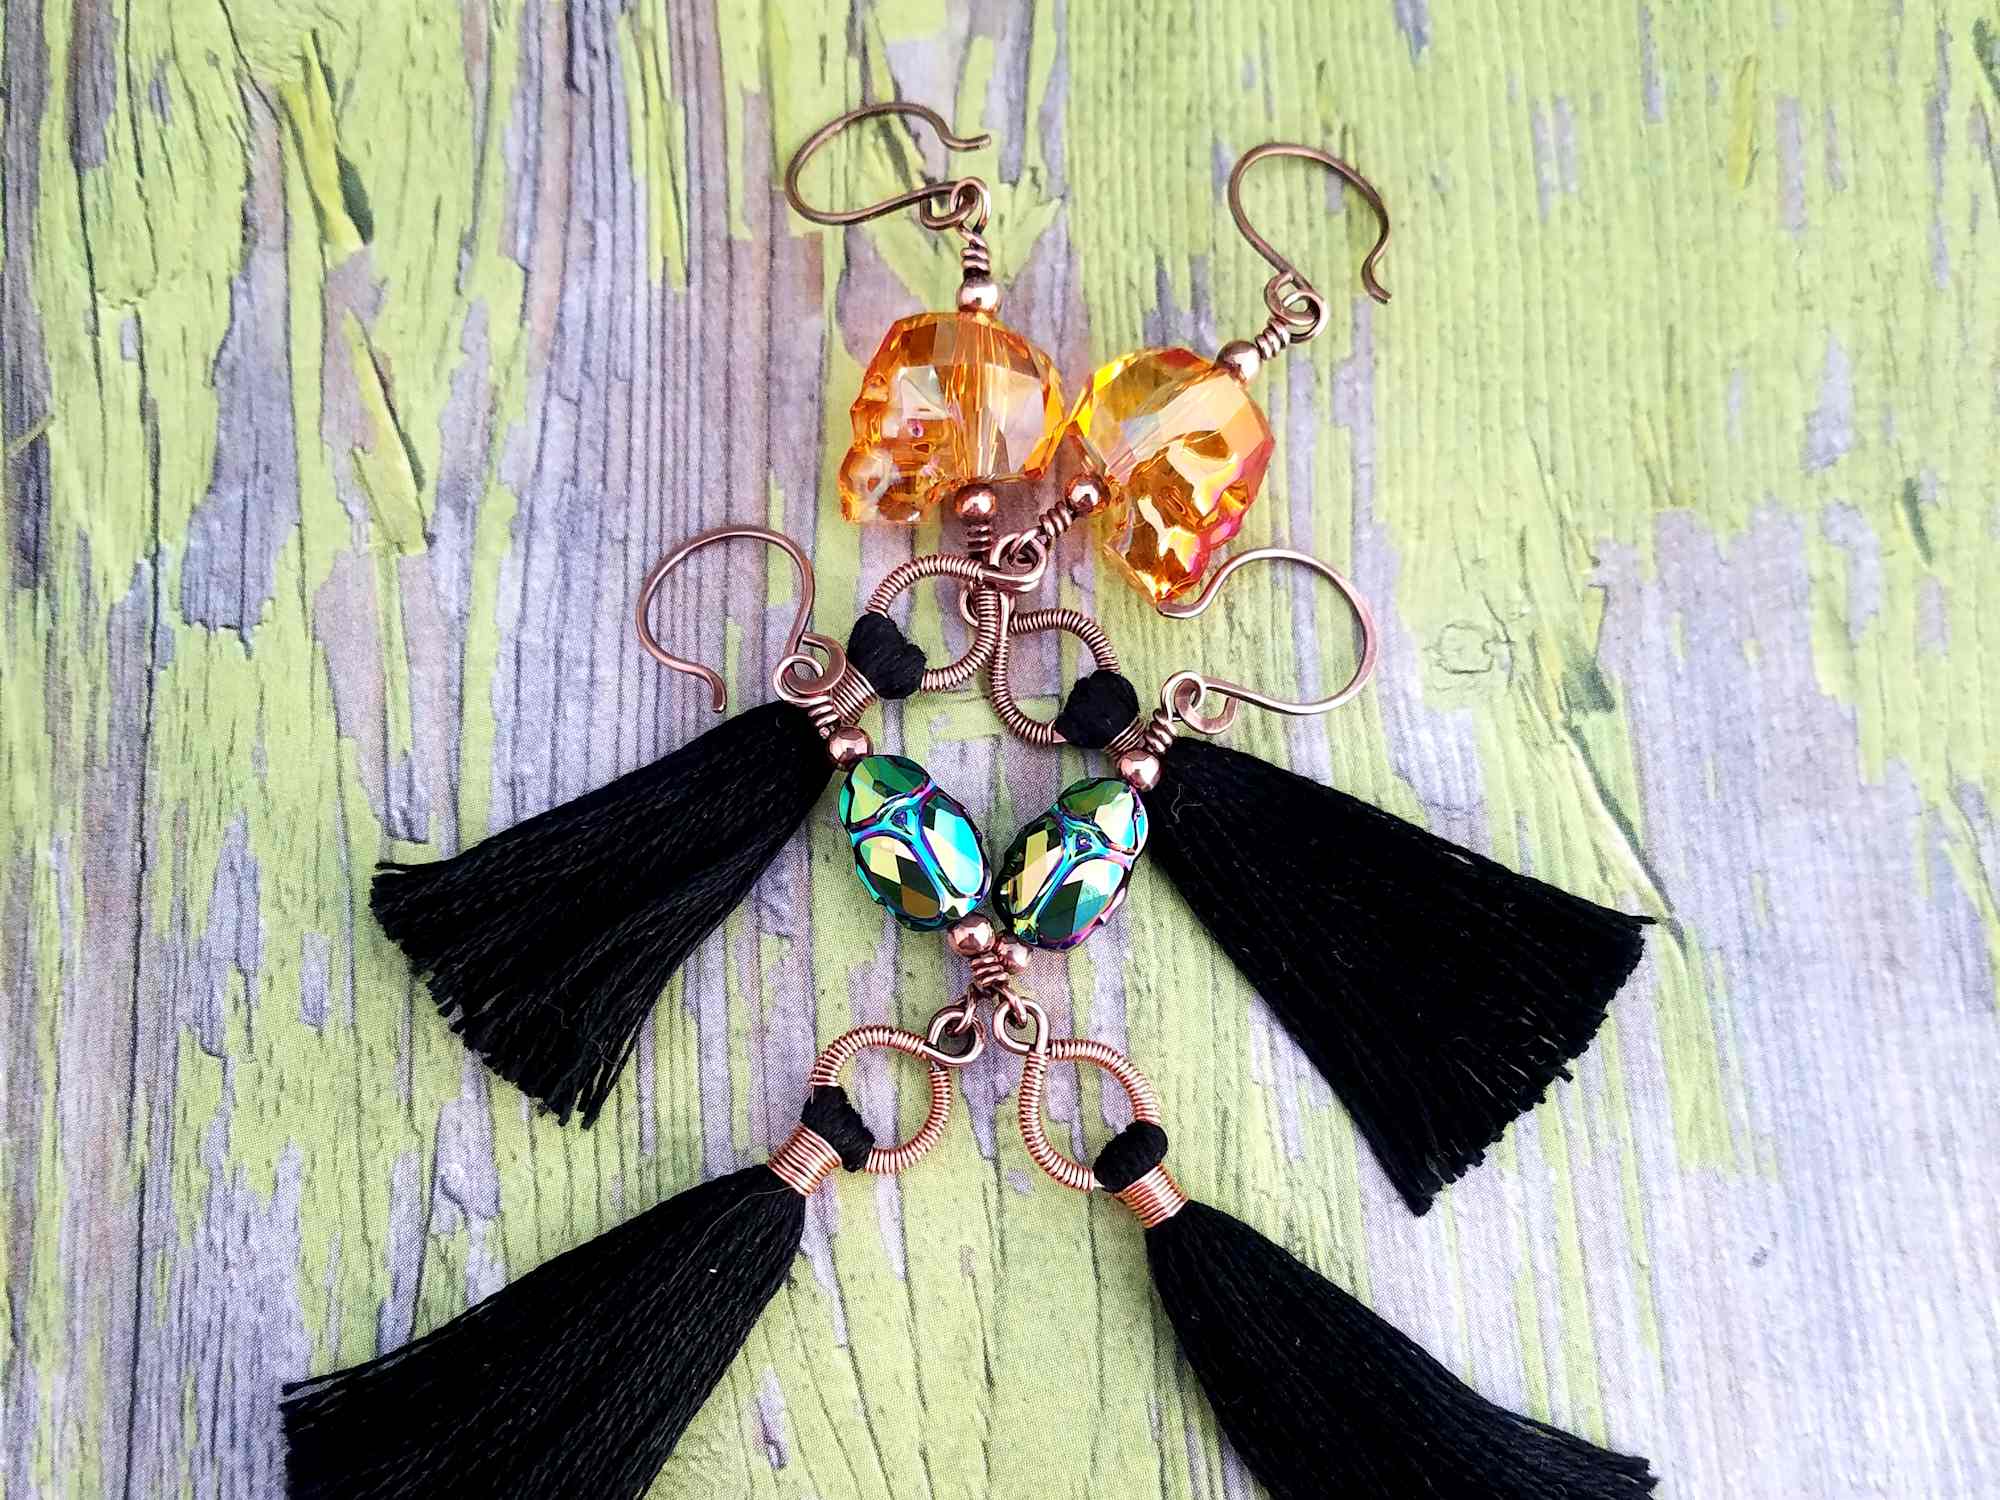 Quick and easy to make, these Spooky Halloween Tassel Earrings are the perfect treat for yourself. Learn to make them with this step-by-step wirework basics tutorial!